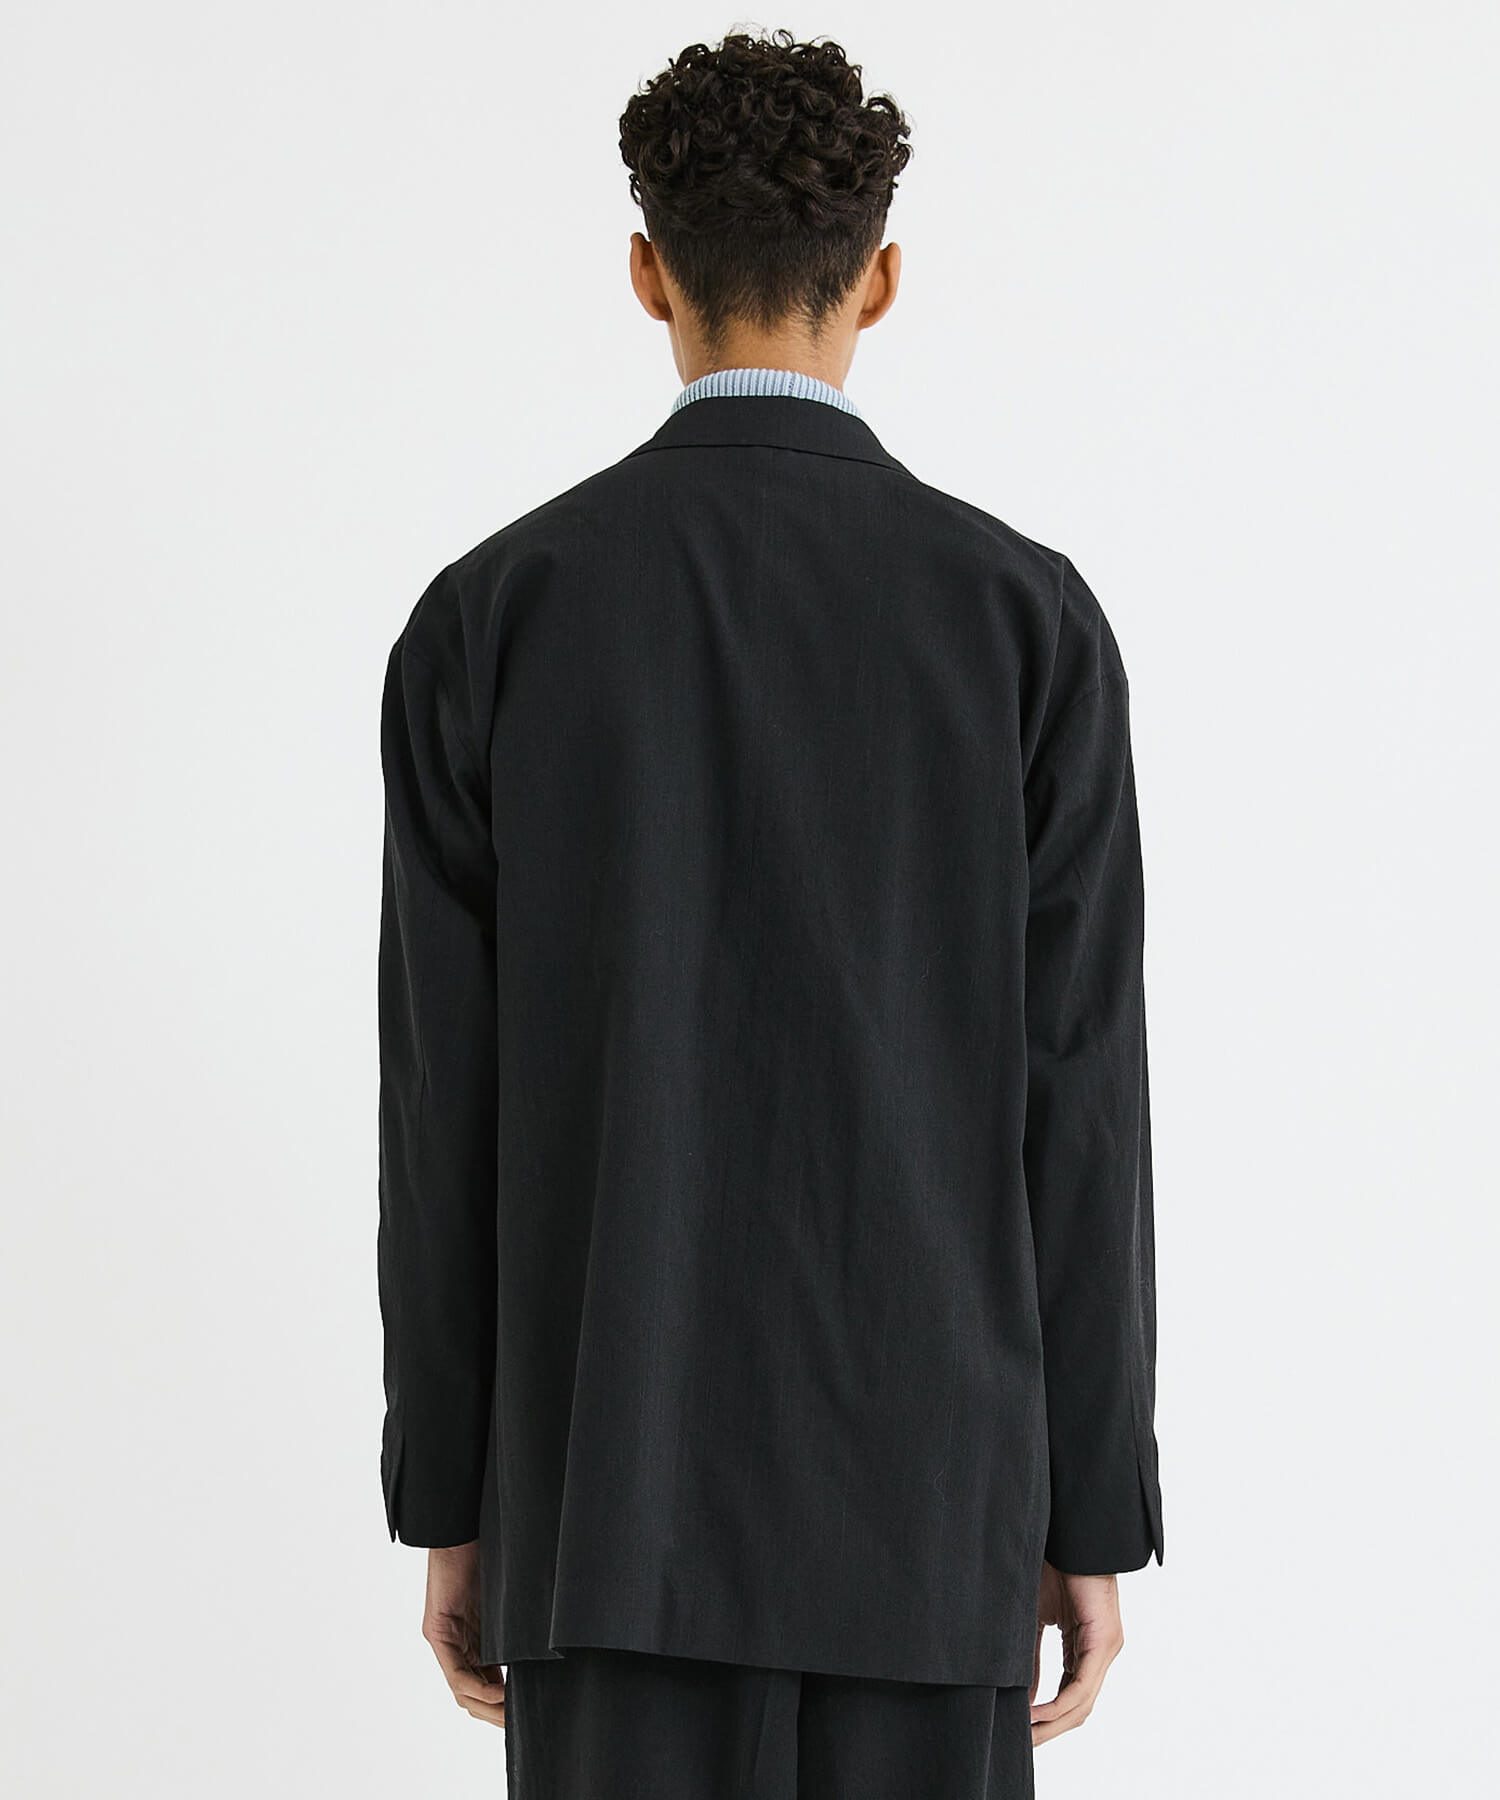 Over Silhouette Jacket WELLDER